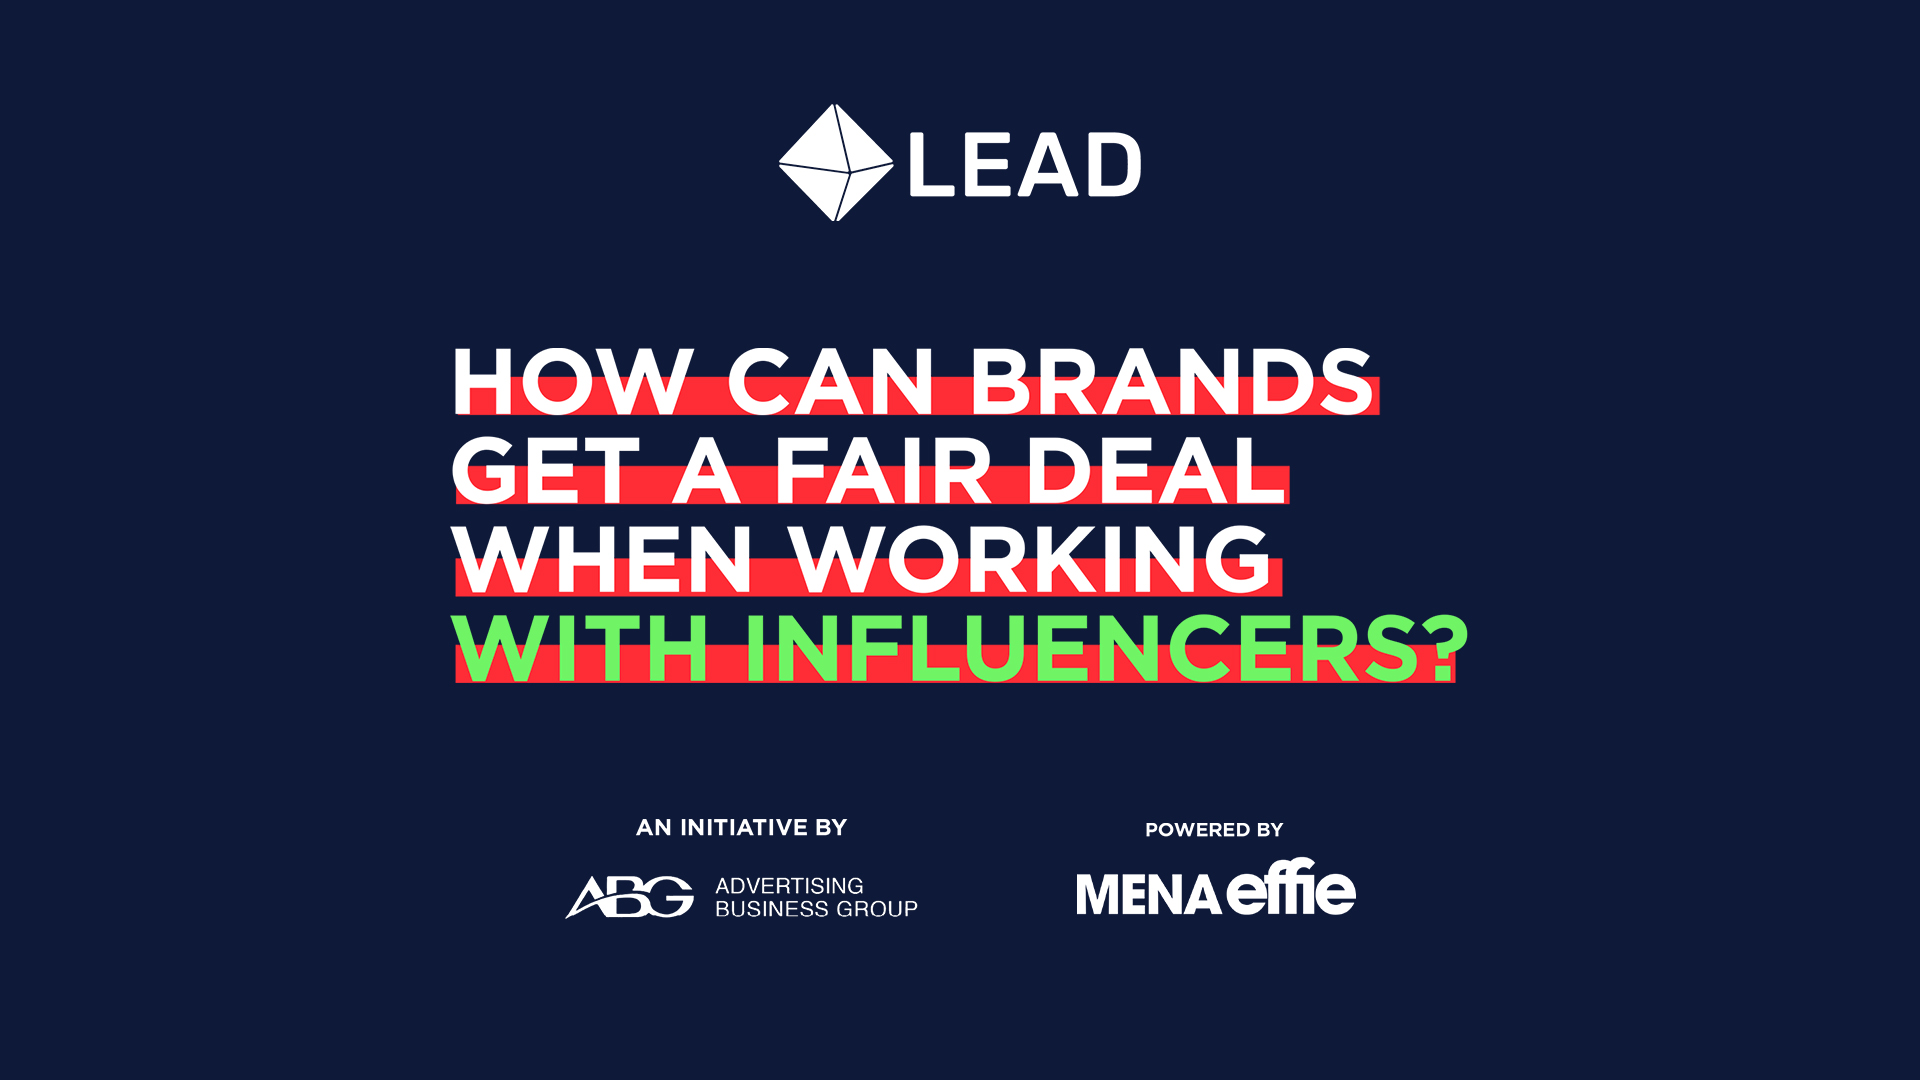 How Can Brands Get a Fair Deal when Working with Influencers?